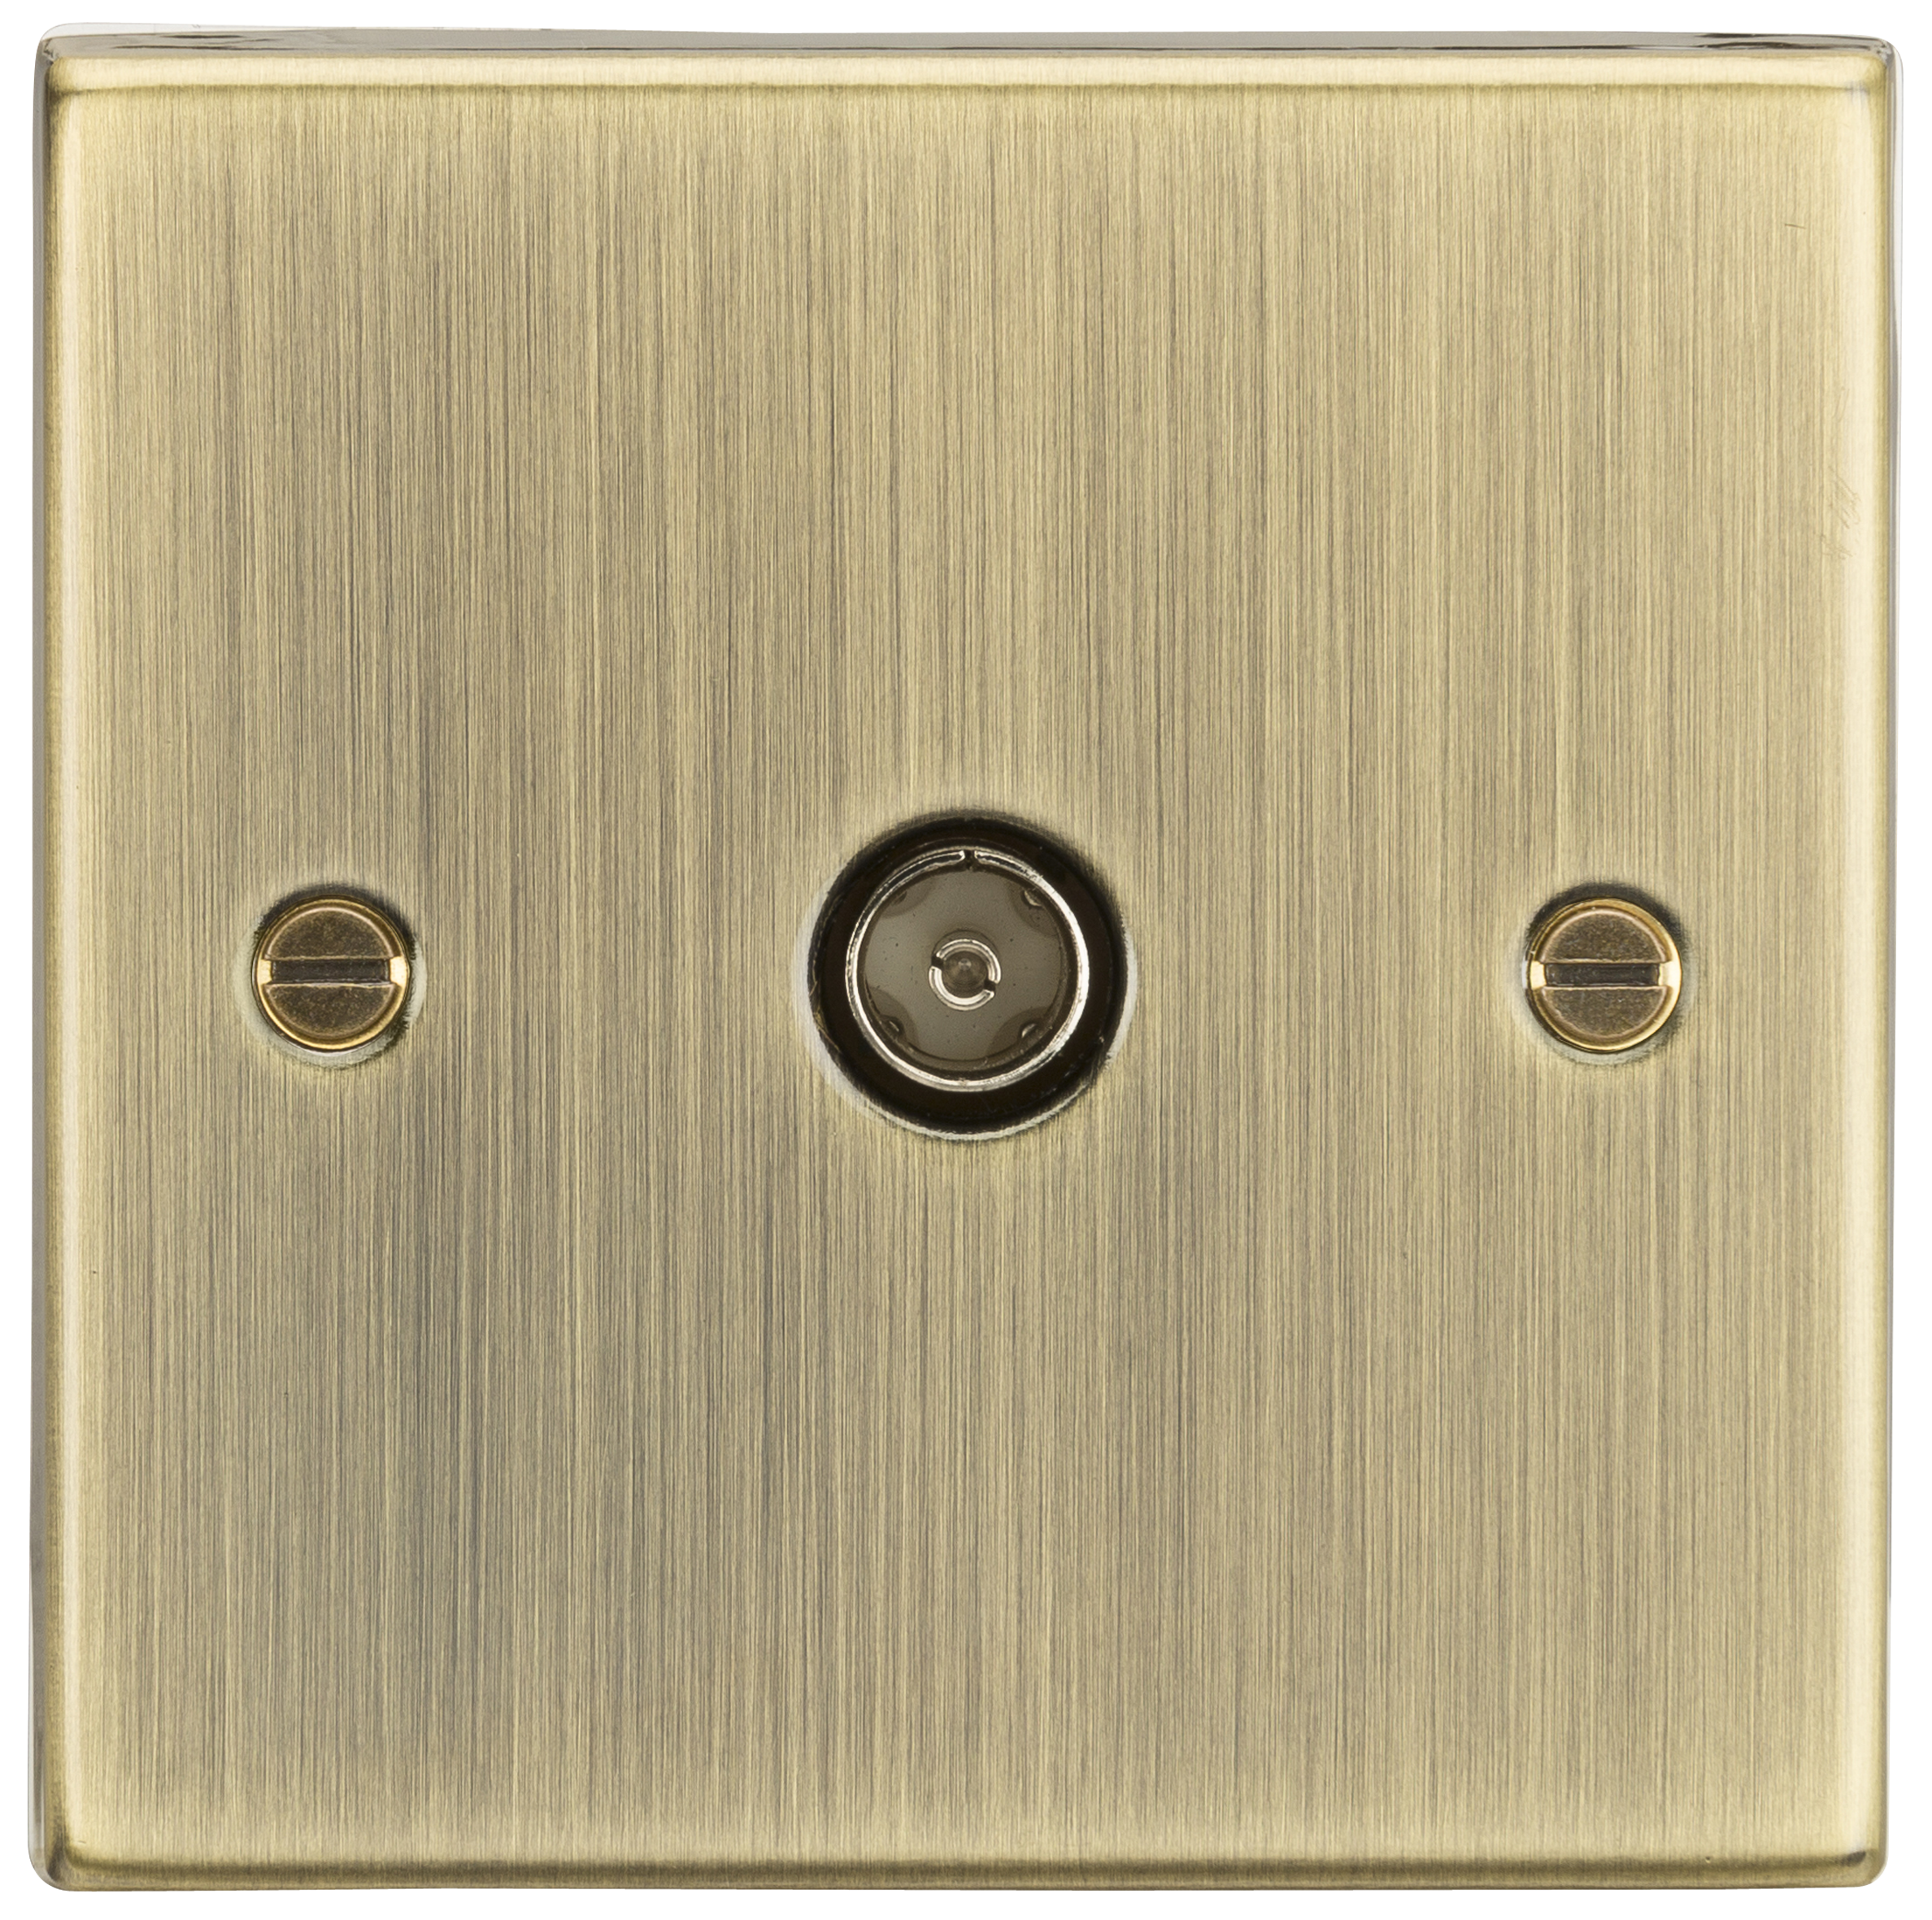 TV Outlet (non-isolated) - Square Edge Antique Brass - CS010AB 